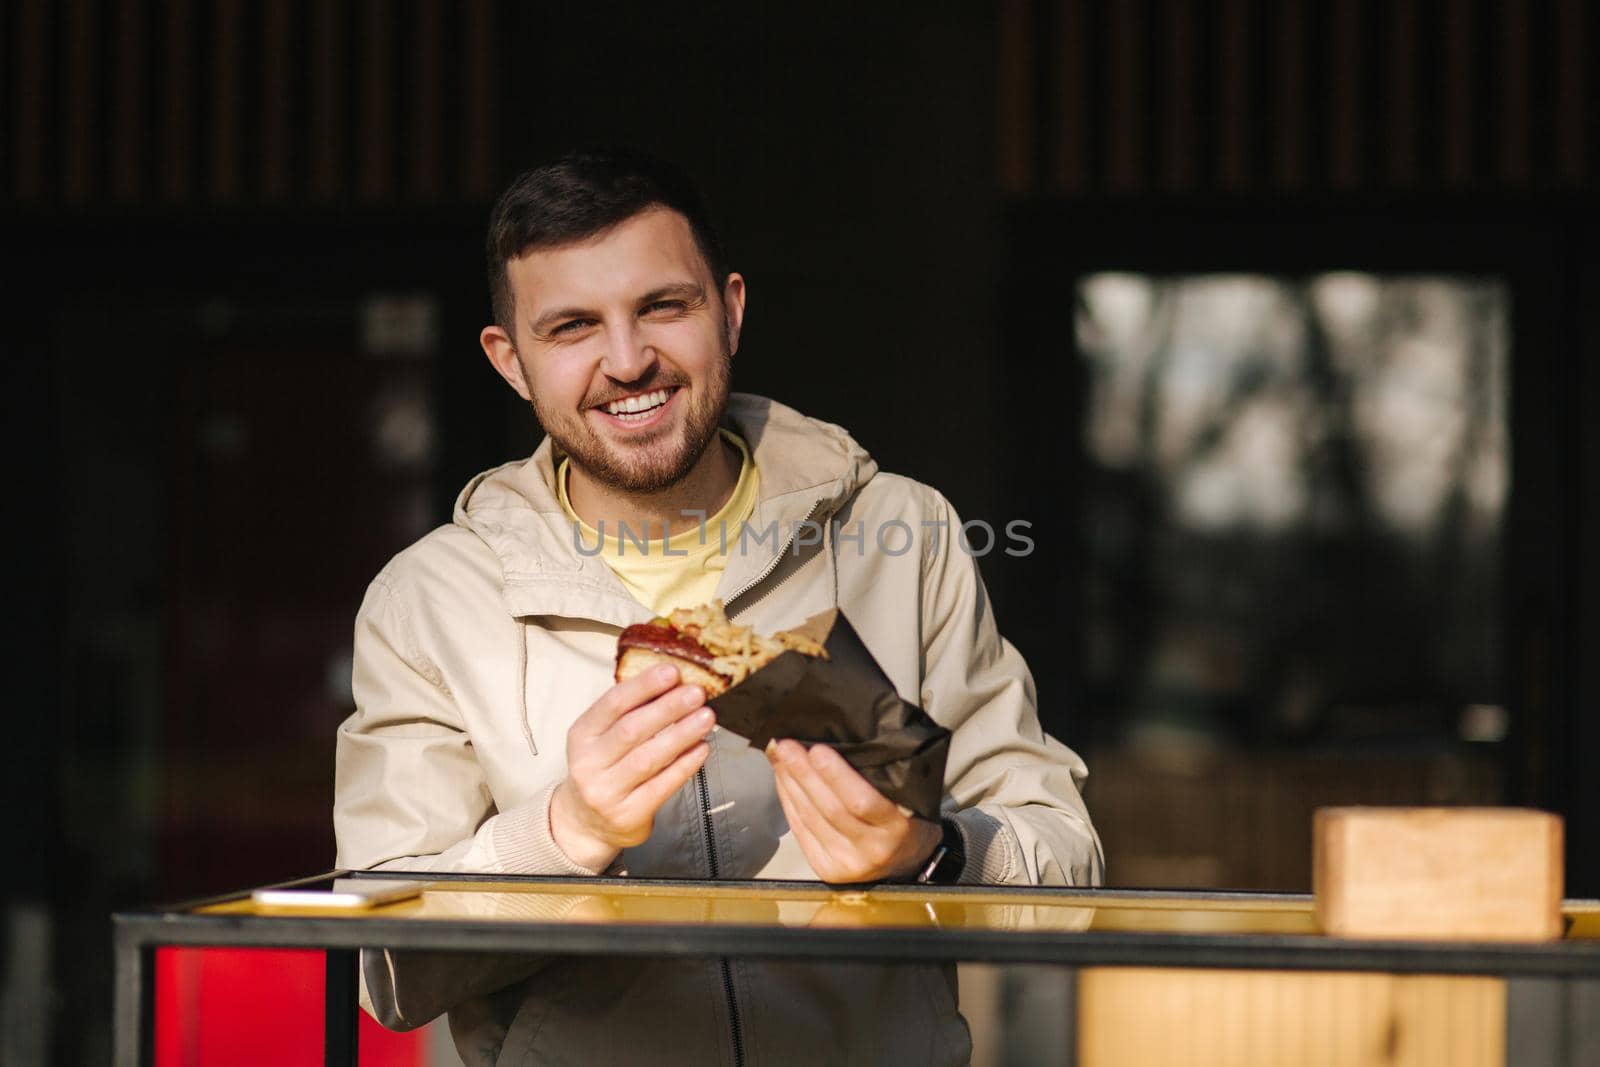 Handsome man having traditional hot dog cuisine during rest break. Caucasian guy enjoying street cuisine outdoor. Male eating unhealthy fast food.